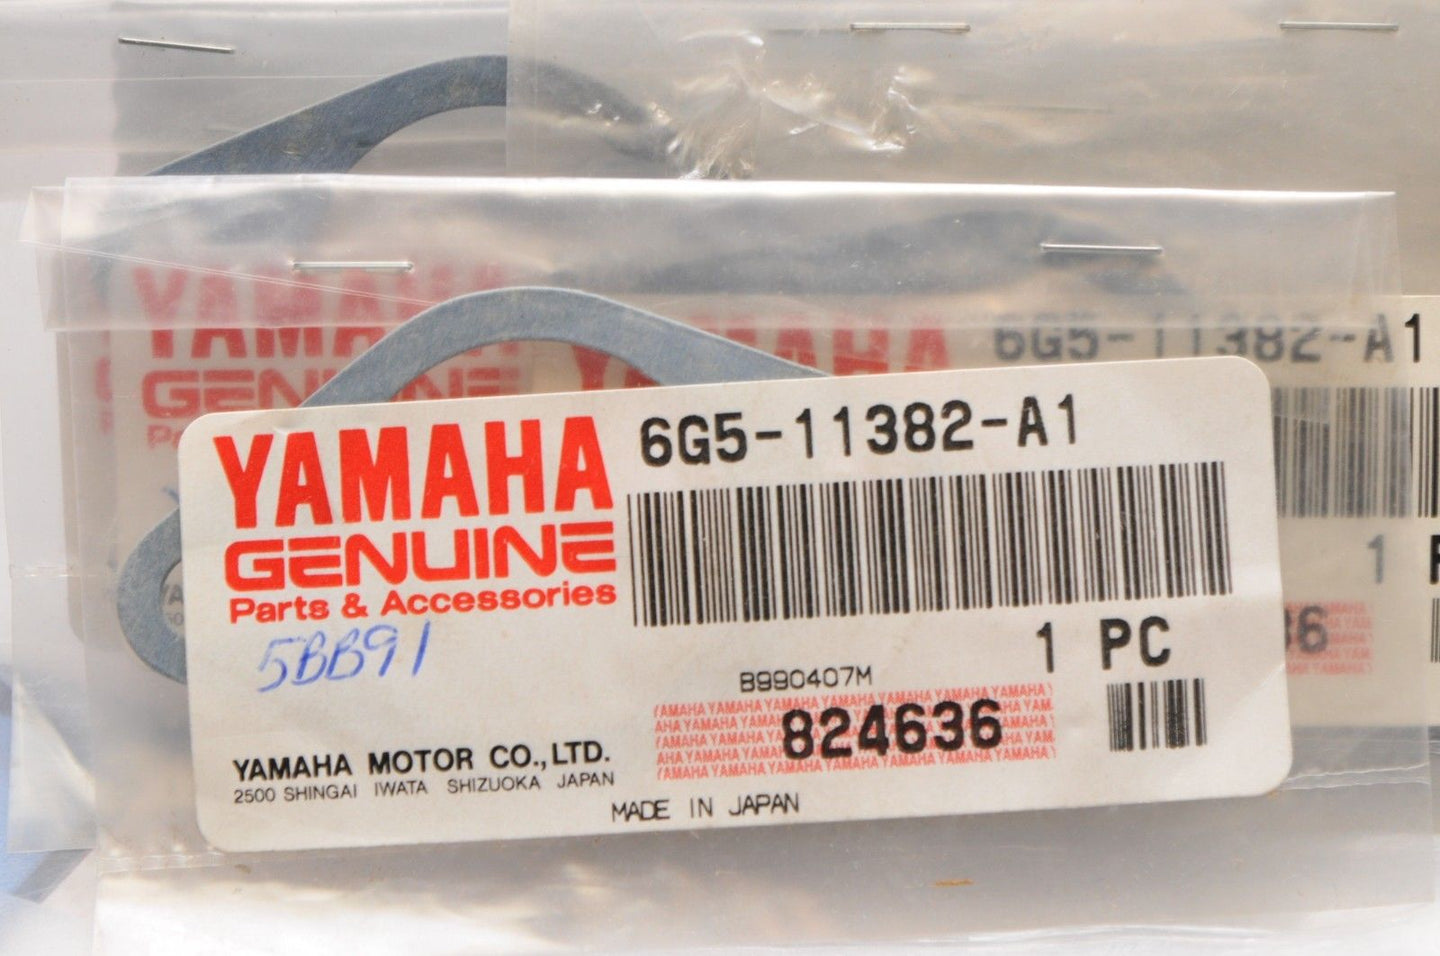 NEW NOS OEM YAMAHA 6G5-11382-A1-00 Qty:19 GASKET RELIEF VALVE 150-250HP MOTOR